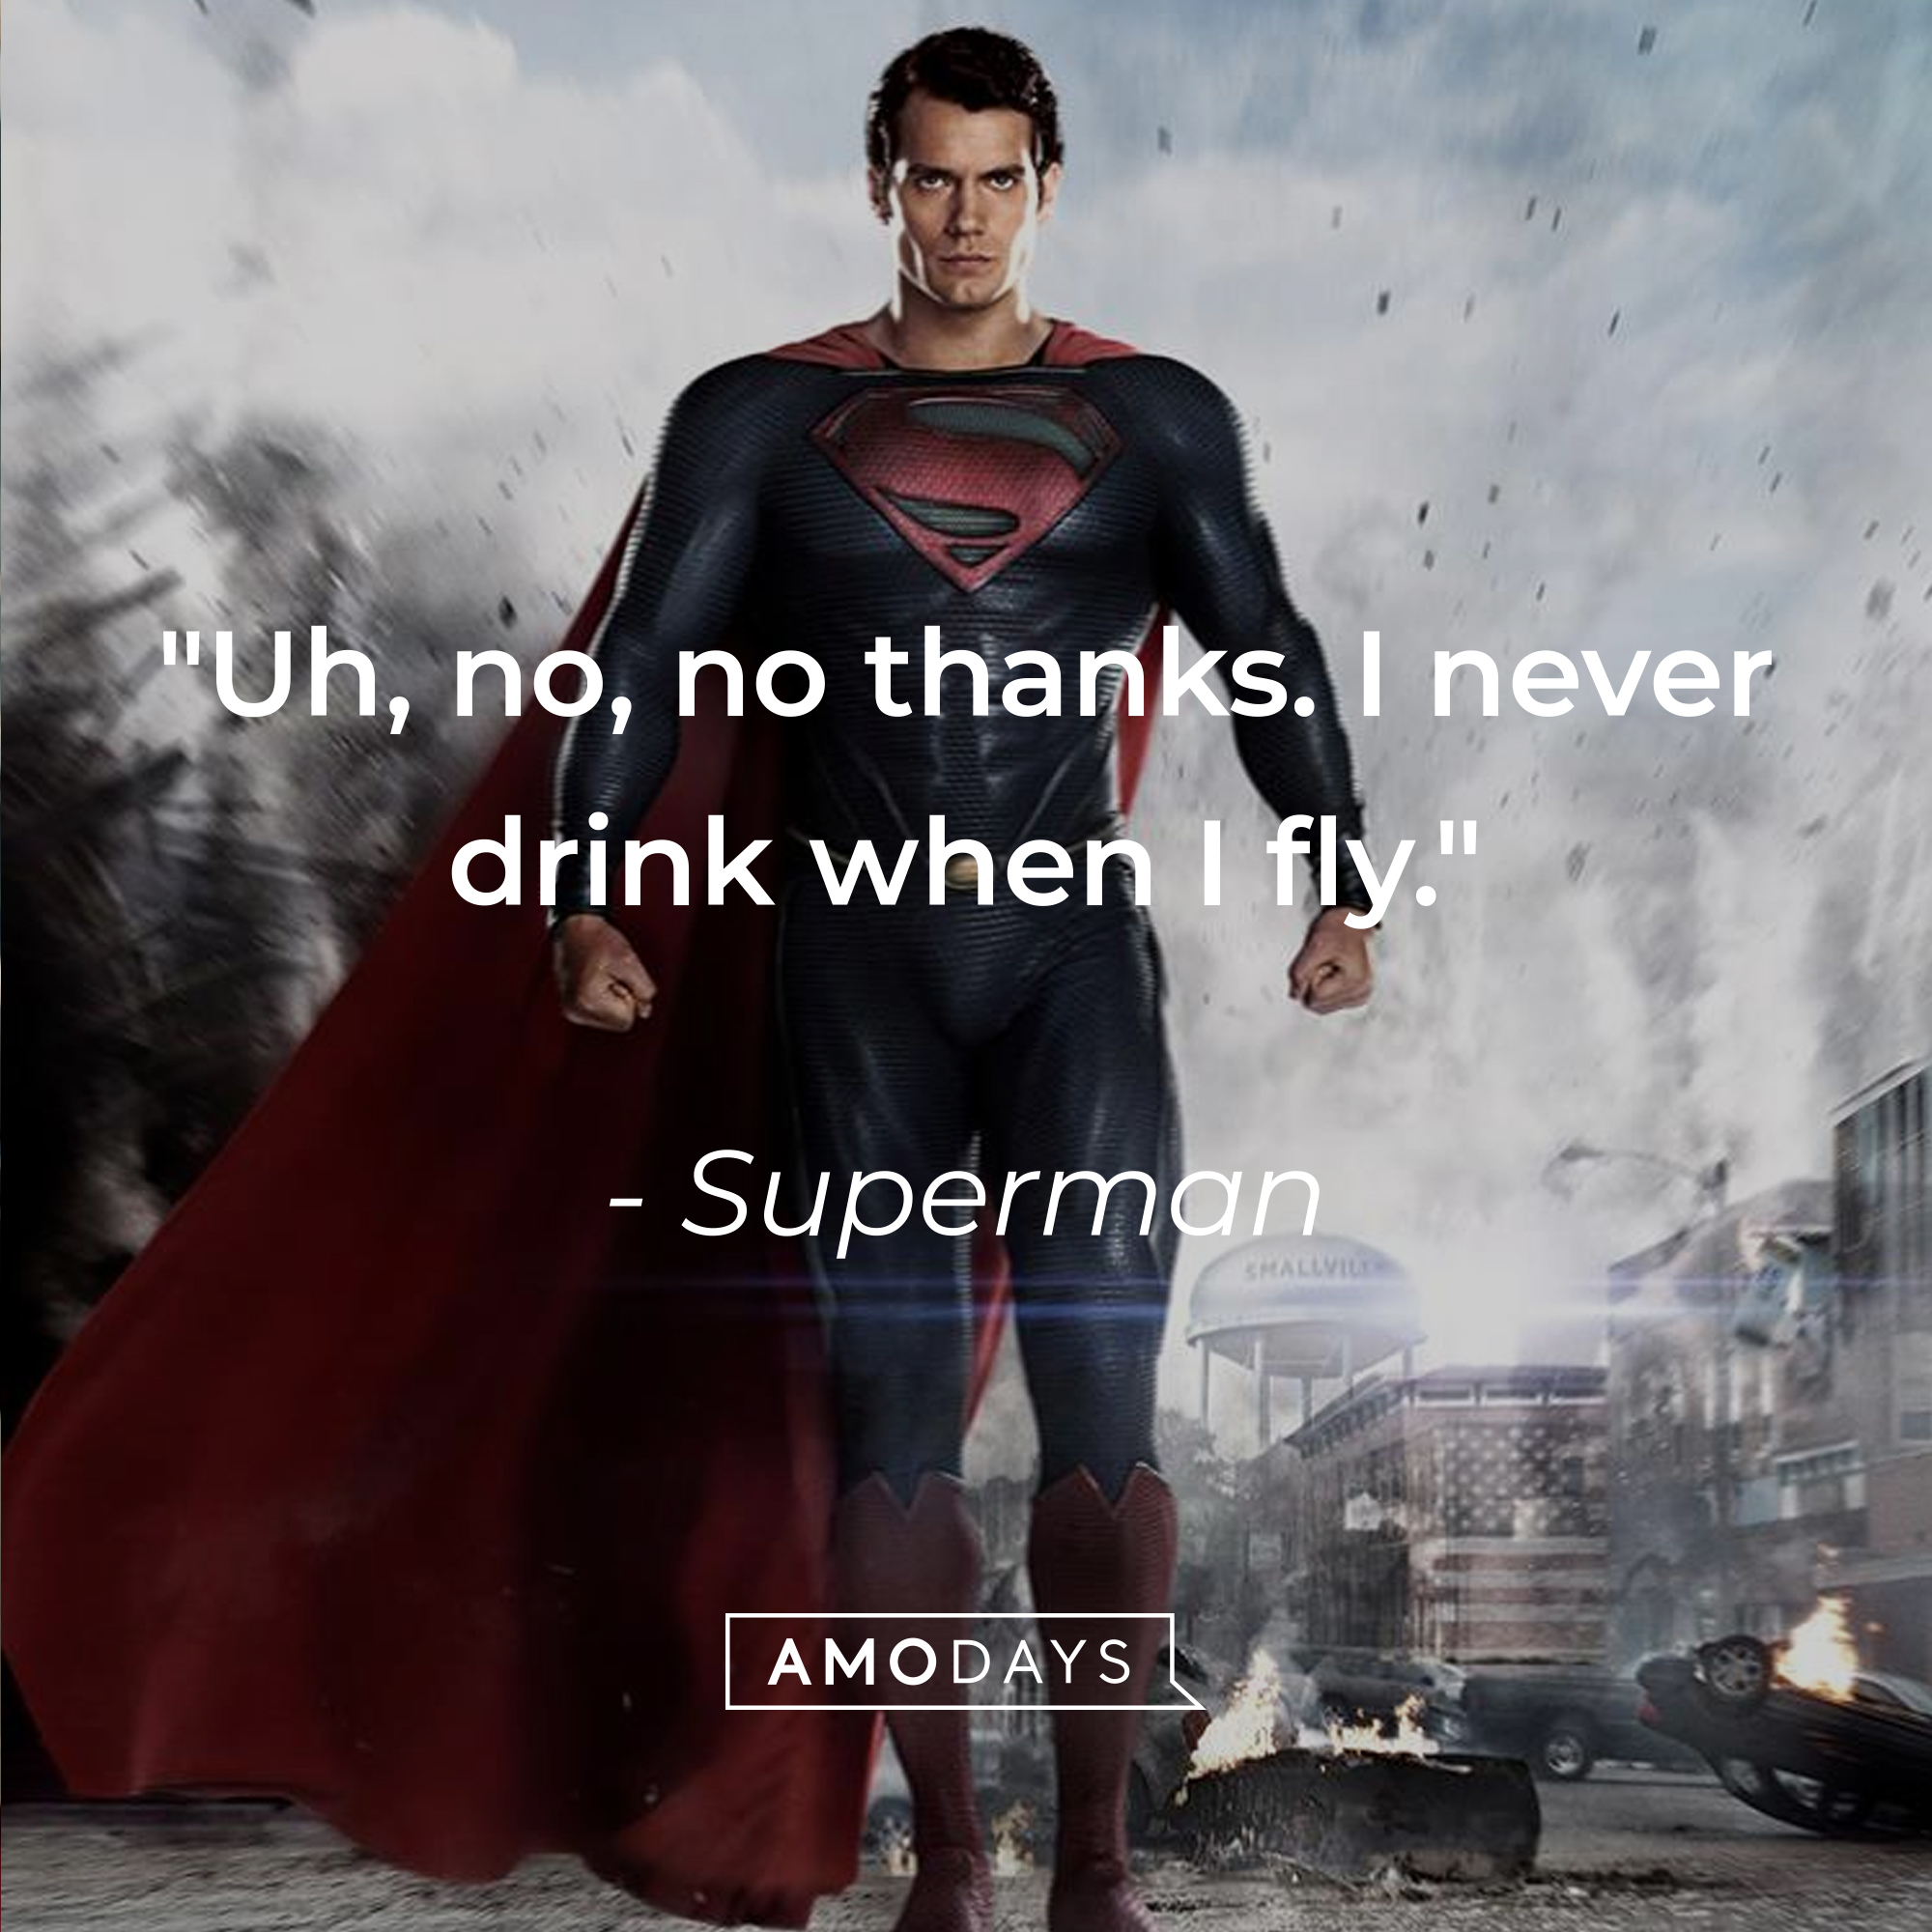 Superman’s quote: "Uh, no, no thanks. I never drink when I fly." | Source: Facebook/manofsteel